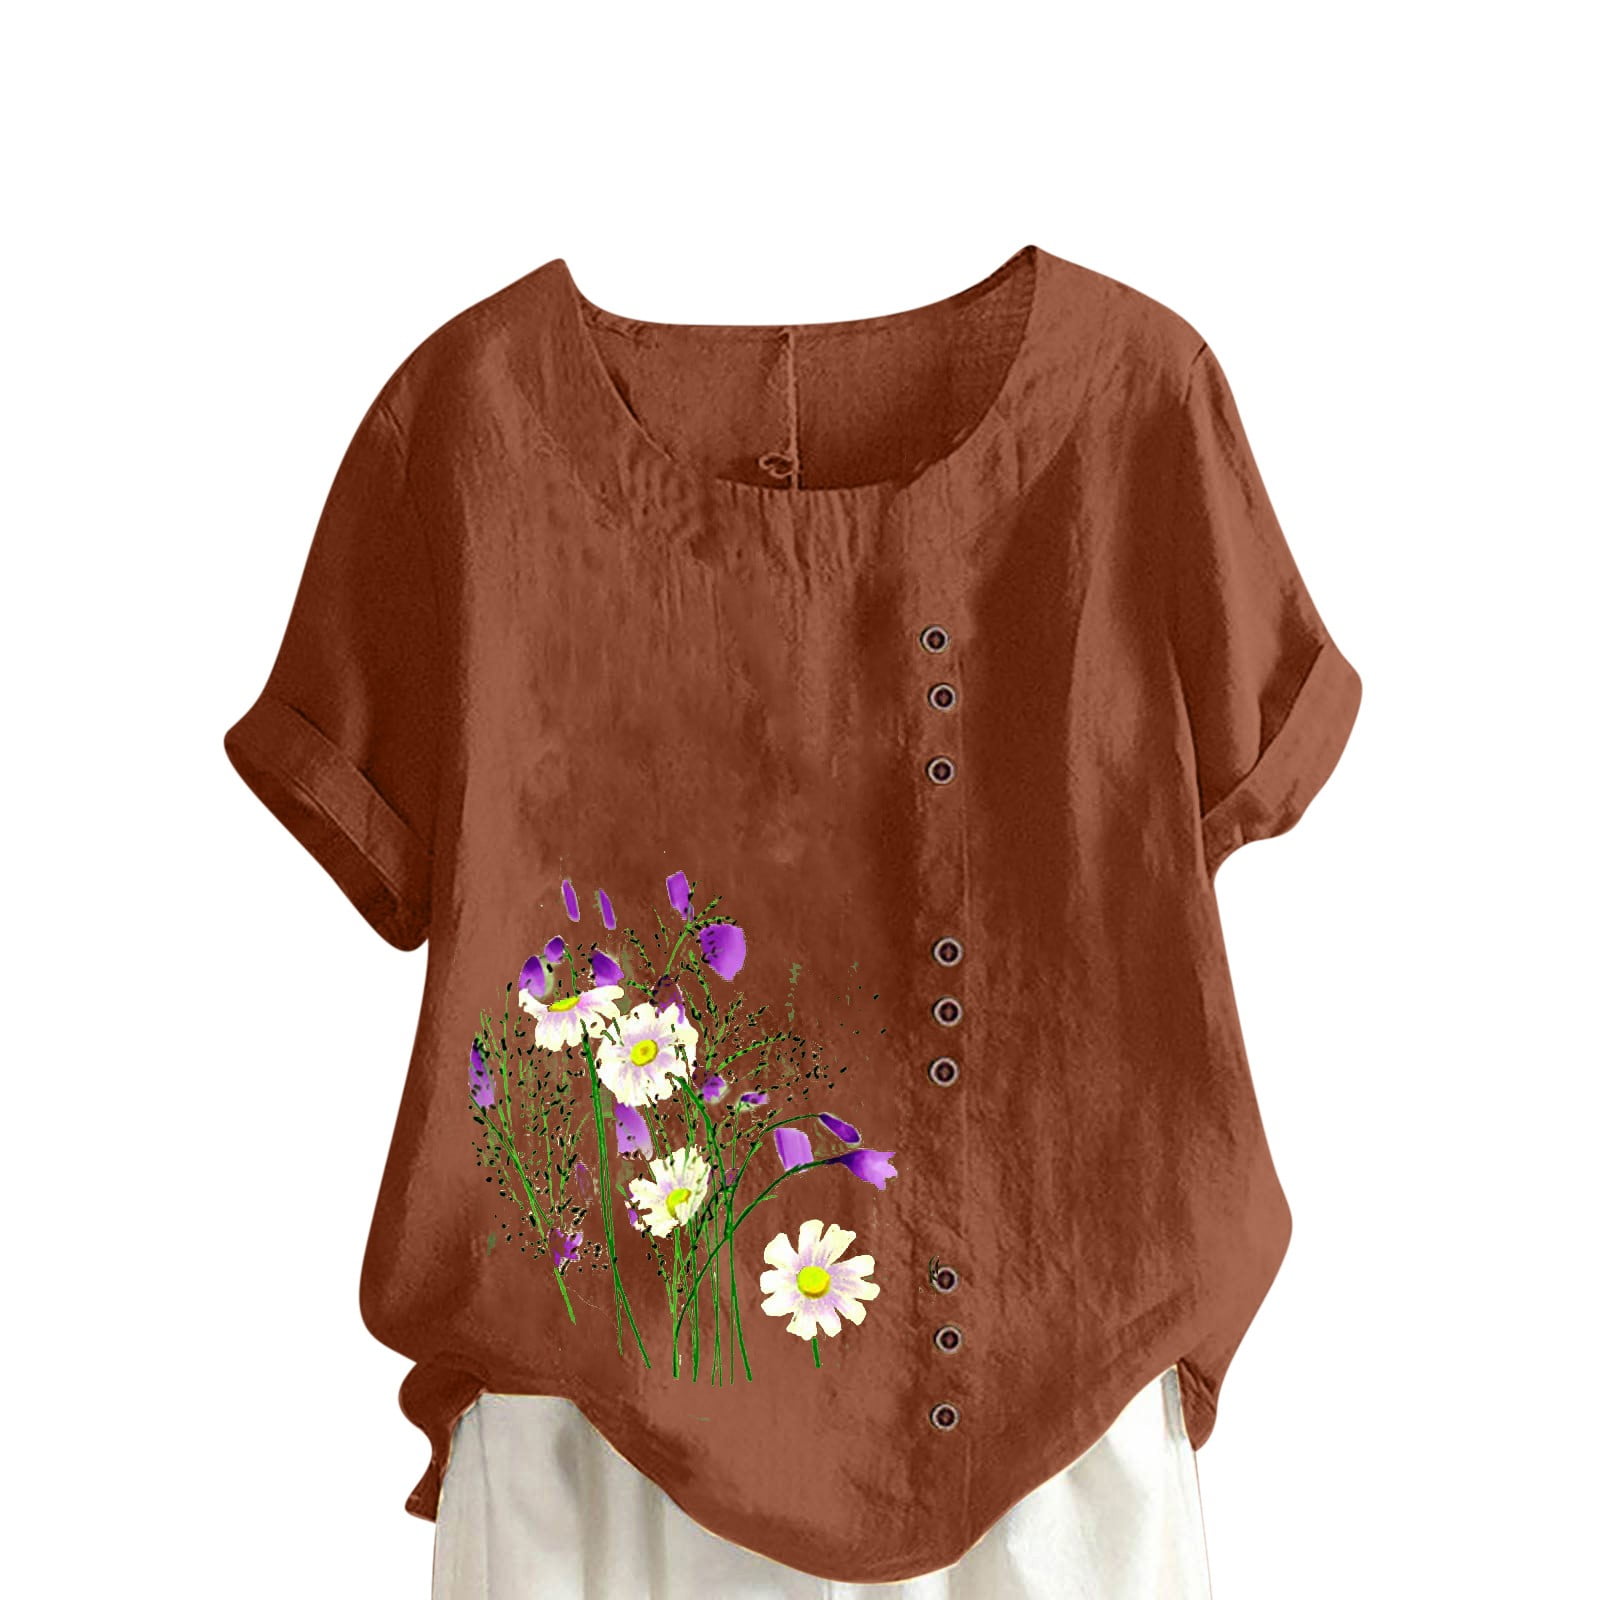 Boho Tops For The Summer - Coffee With Summer